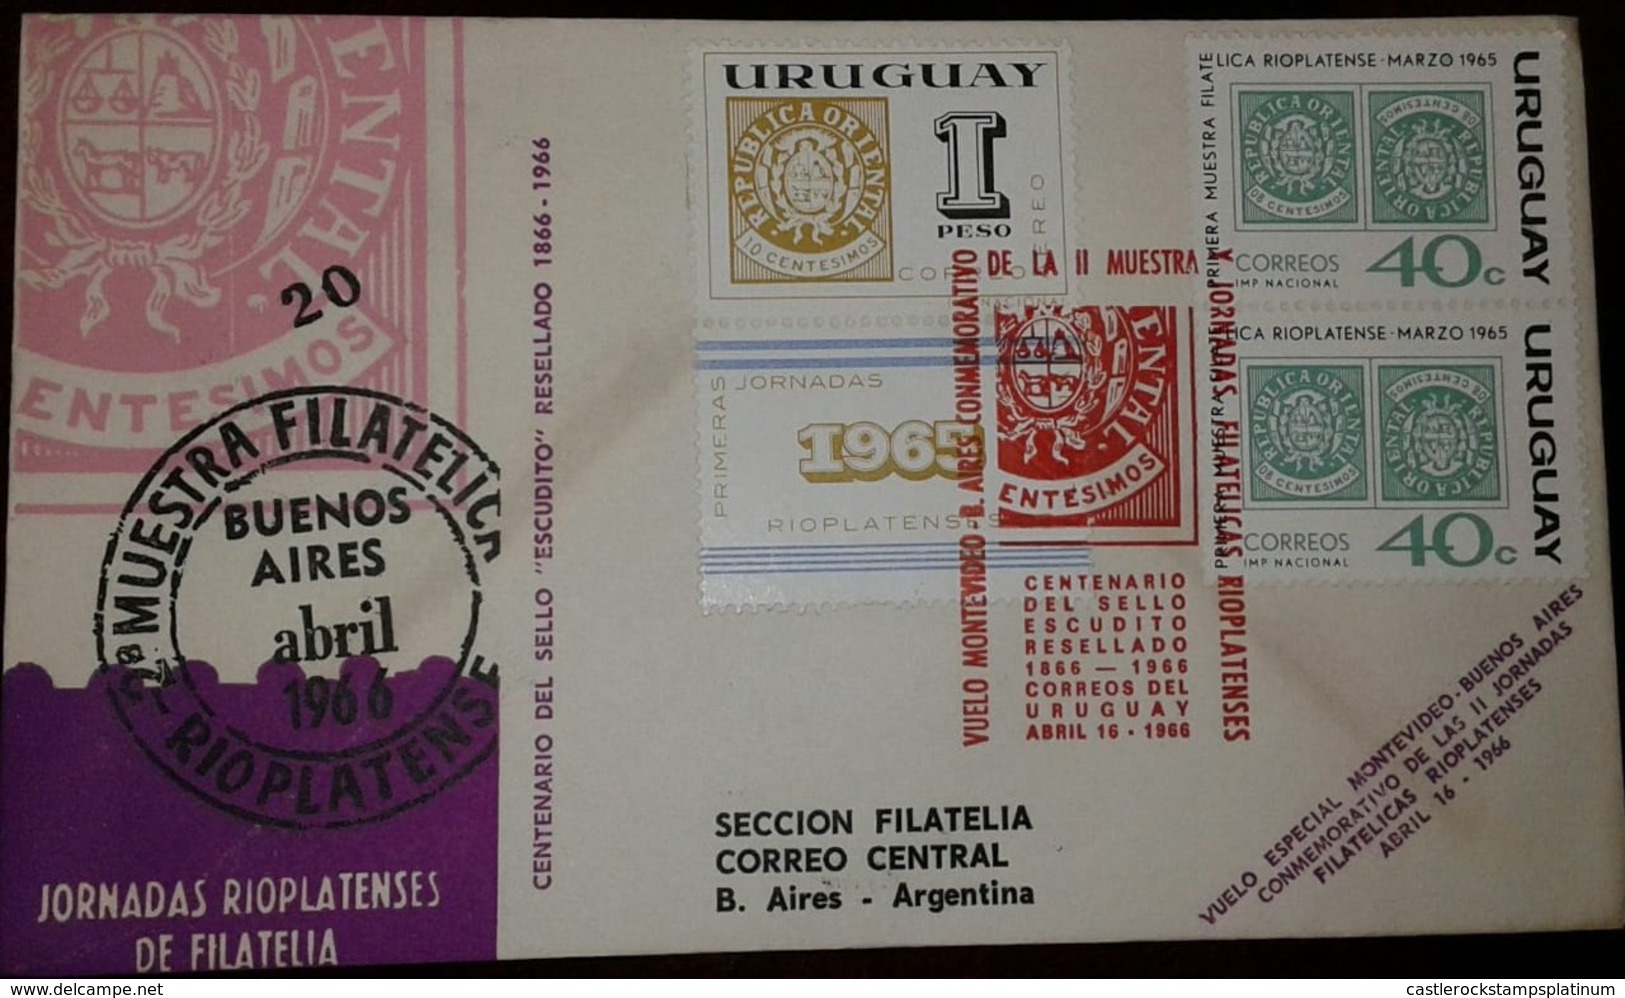 L) 1966 URUGUAY, FIRST DAYS RIOPLATENSES, 1965, CENTENARY OF THE RESETTED COAT OF SEAL 1866-1966, 40C, GREEN, SPECIAL FL - Uruguay